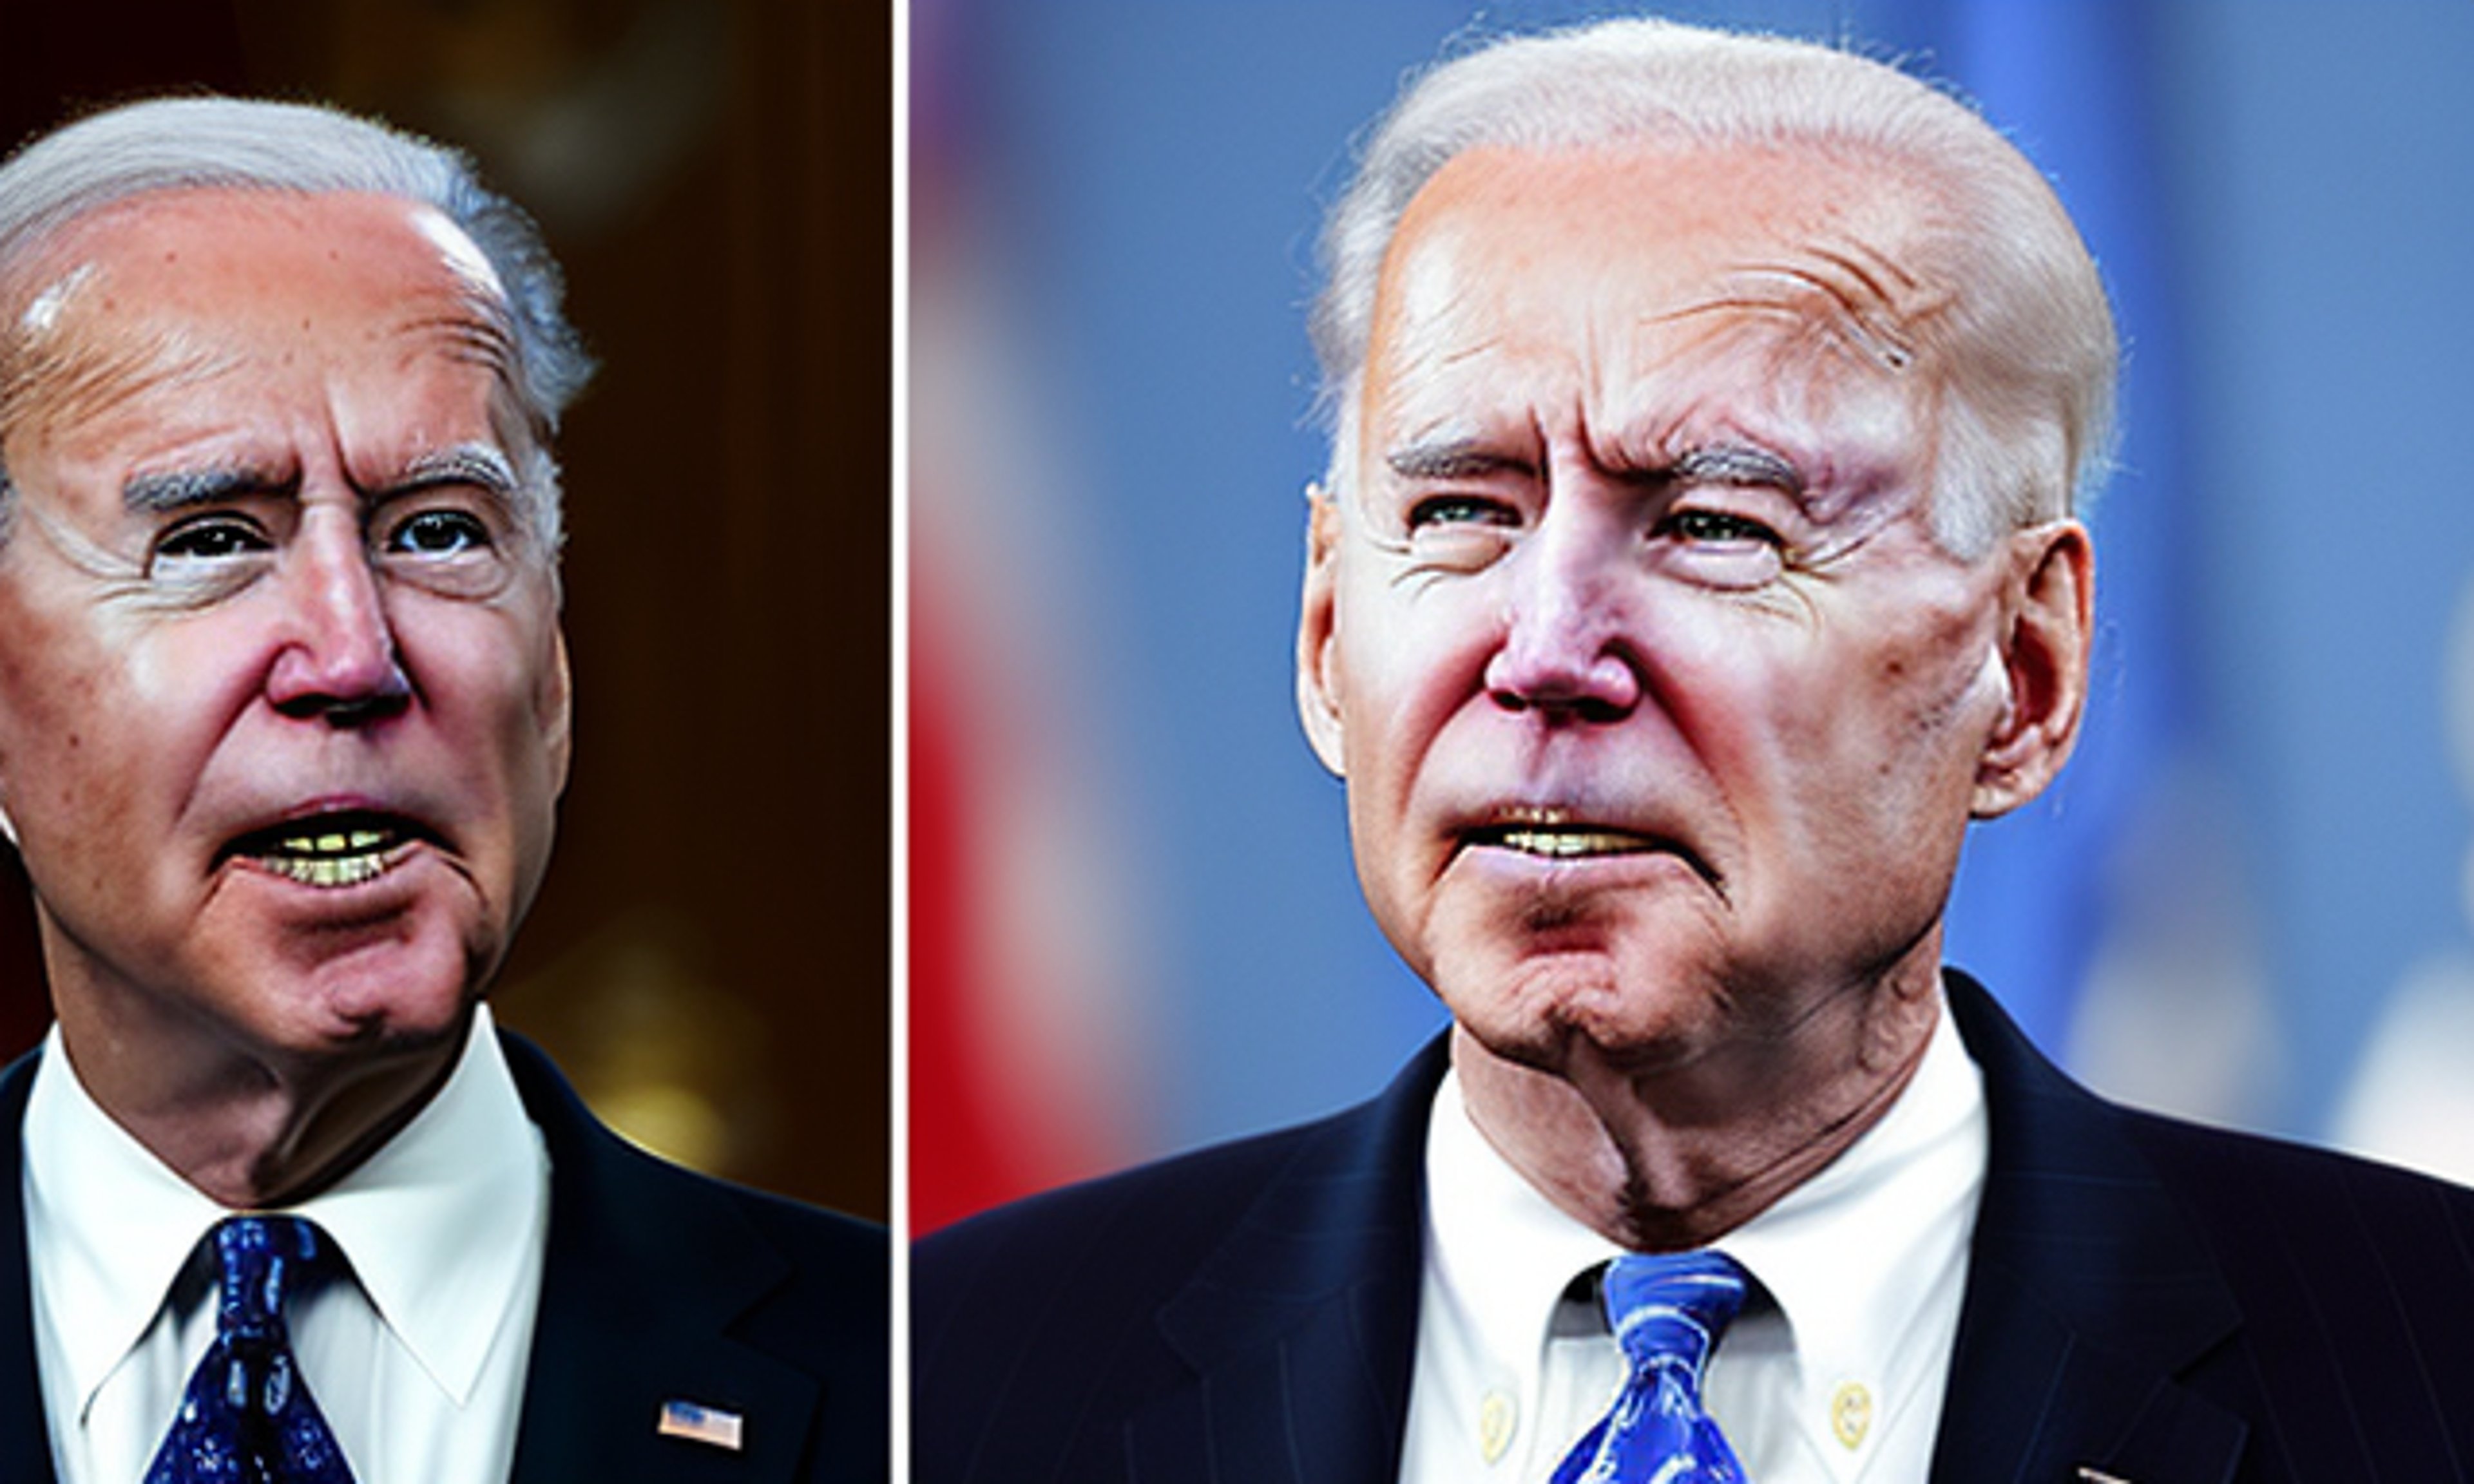 Key Witness in Biden Corruption Probe Goes Missing, According to House Oversight Committee Report